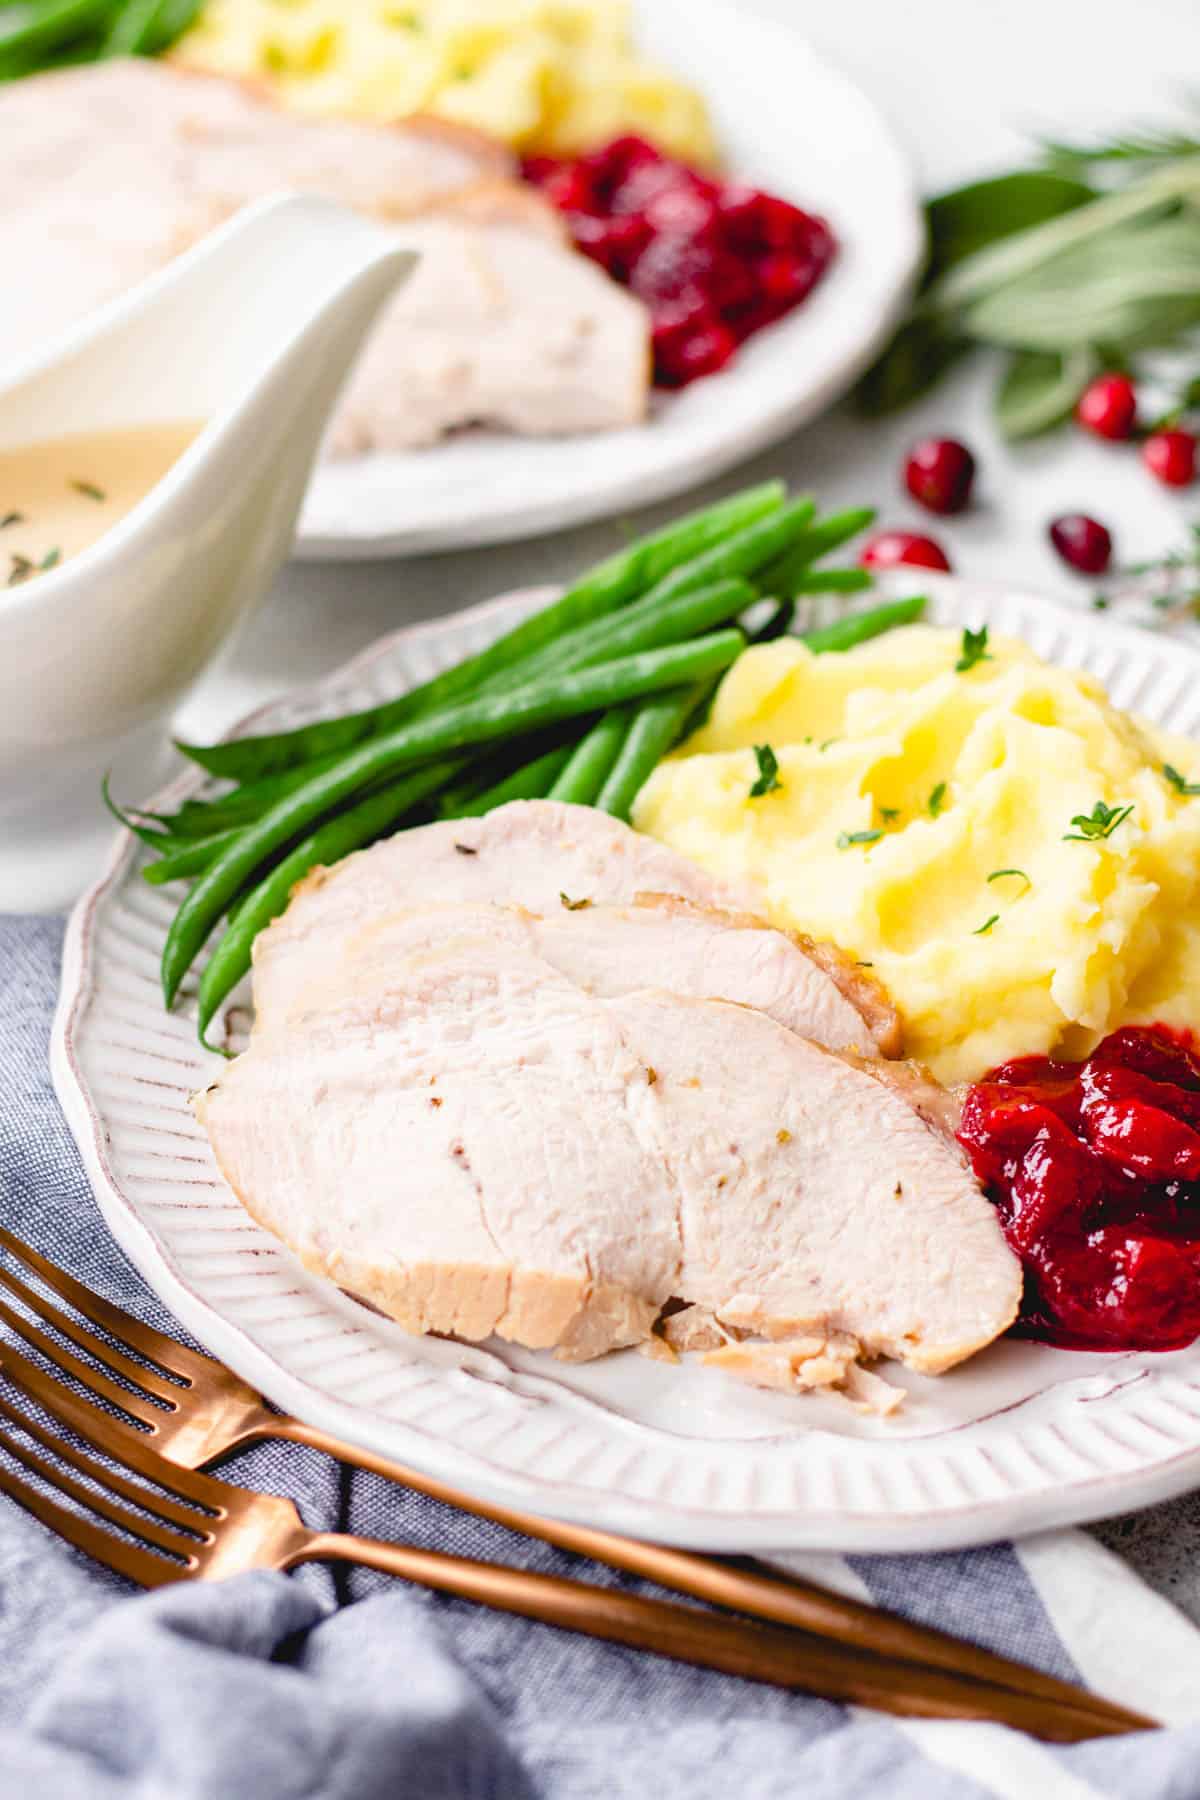 Slices ob turkey meat, mashed potatoes, green beans, and cranberry sauce on a plate.